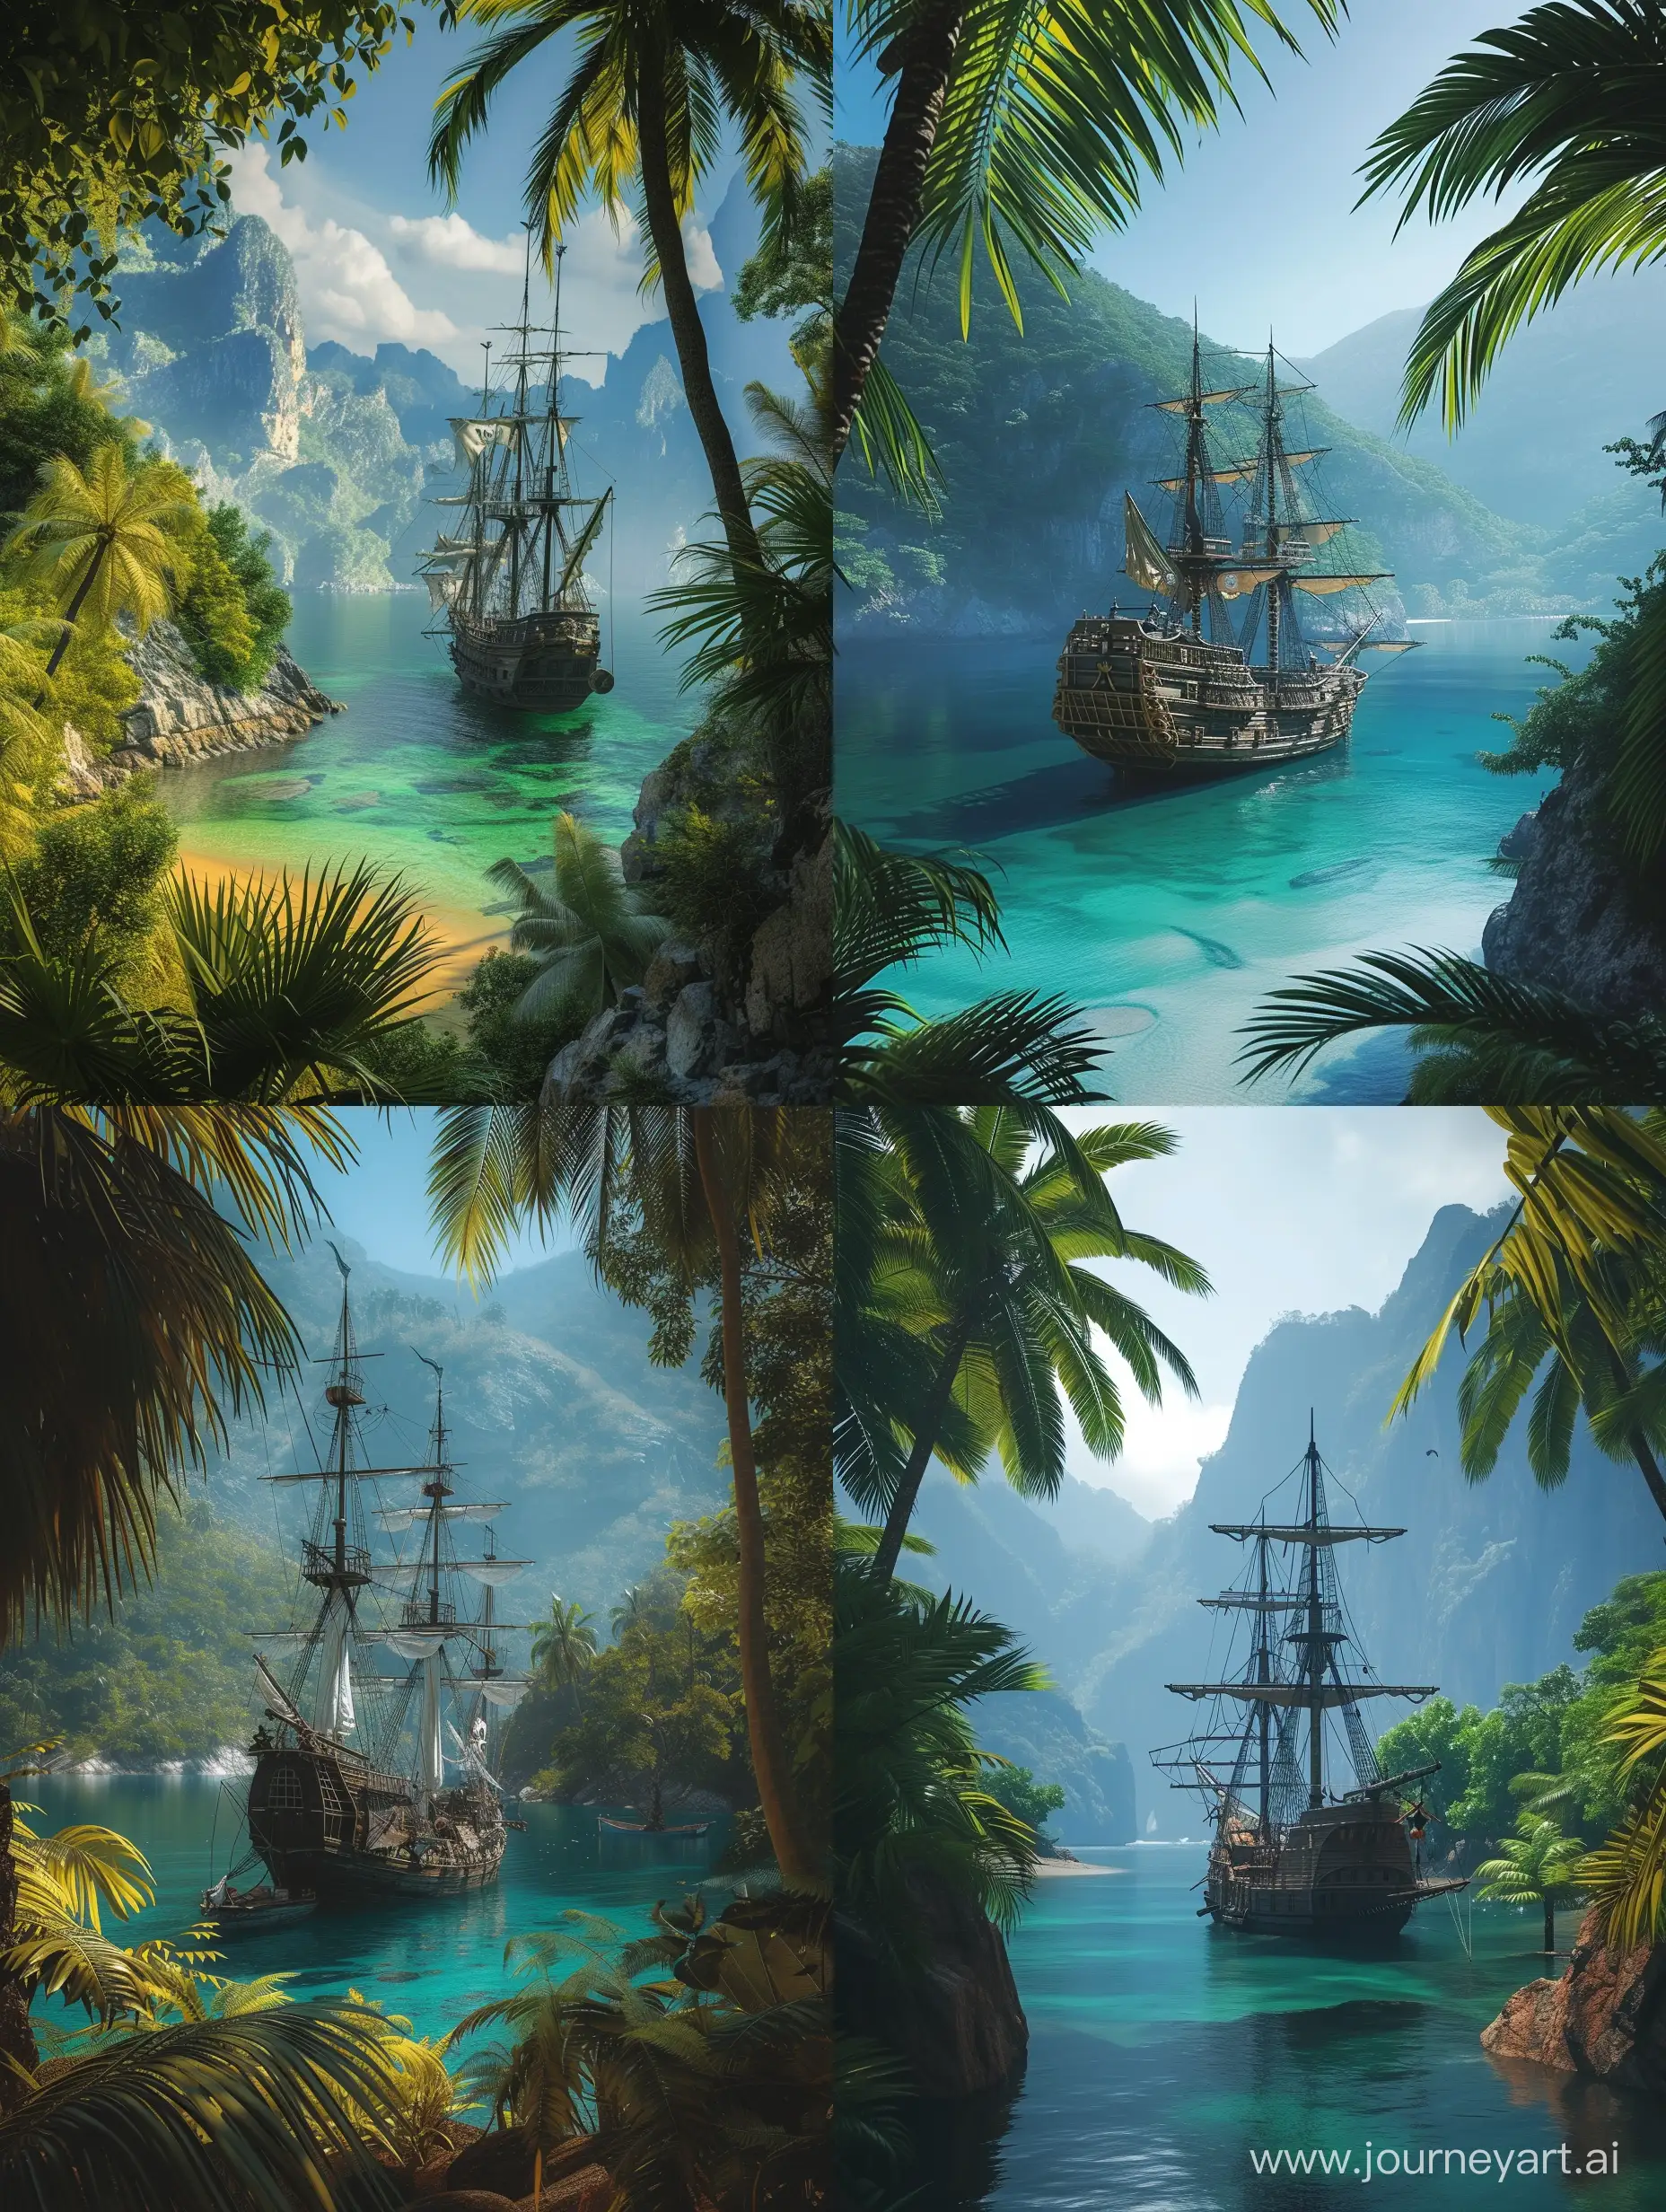 Vibrant-Pirate-Ship-Sailing-in-a-Tropical-Bay